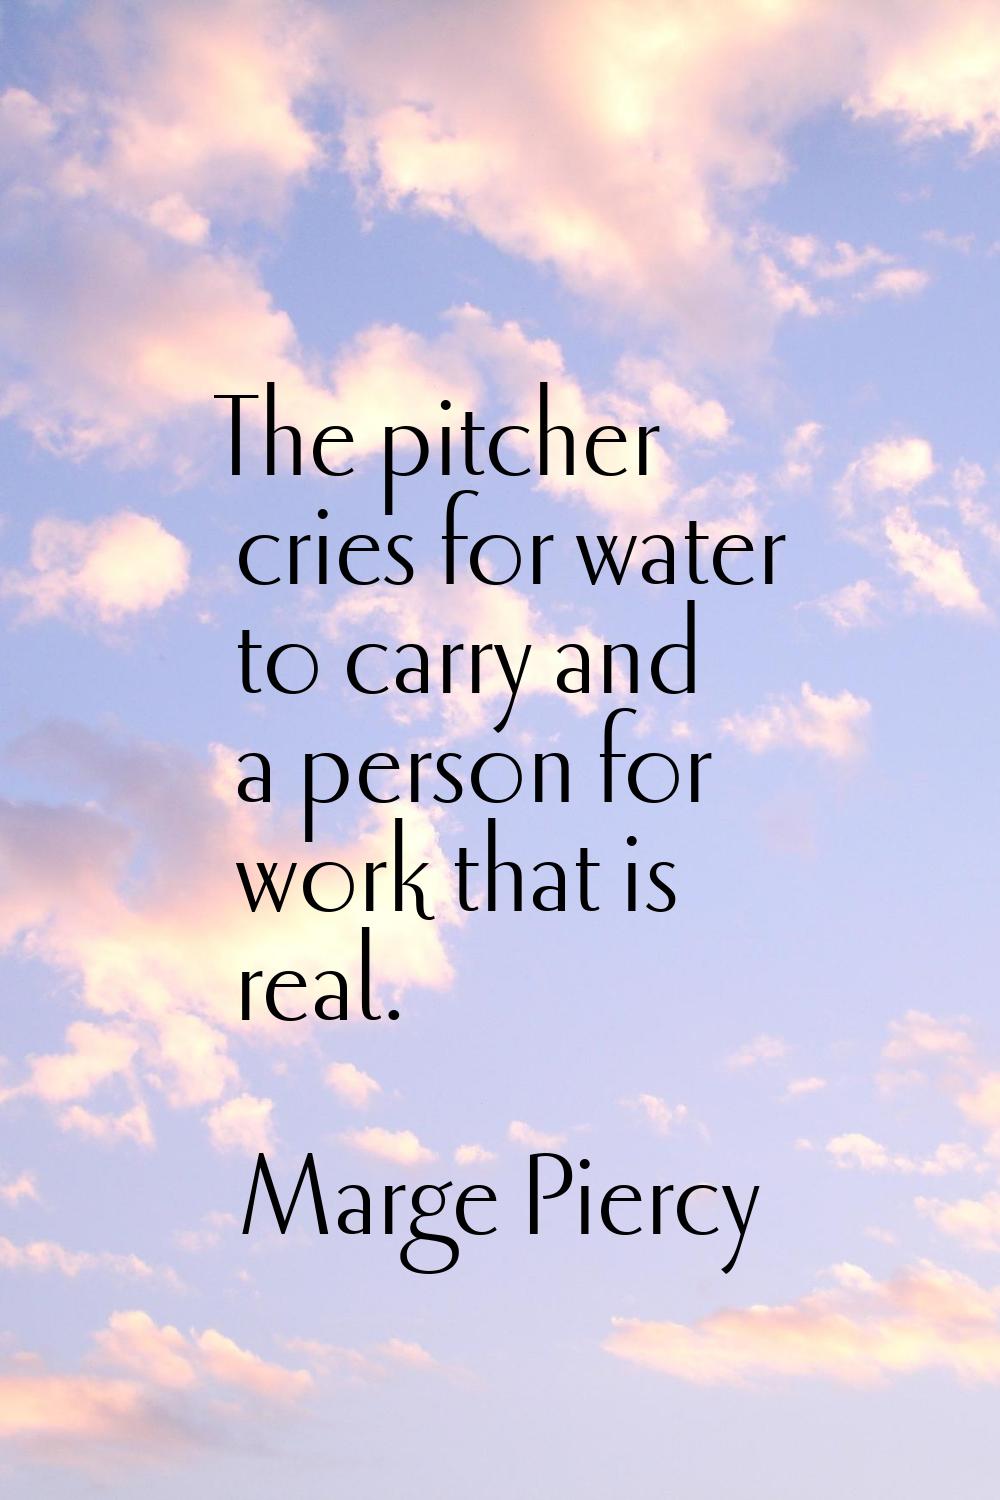 The pitcher cries for water to carry and a person for work that is real.